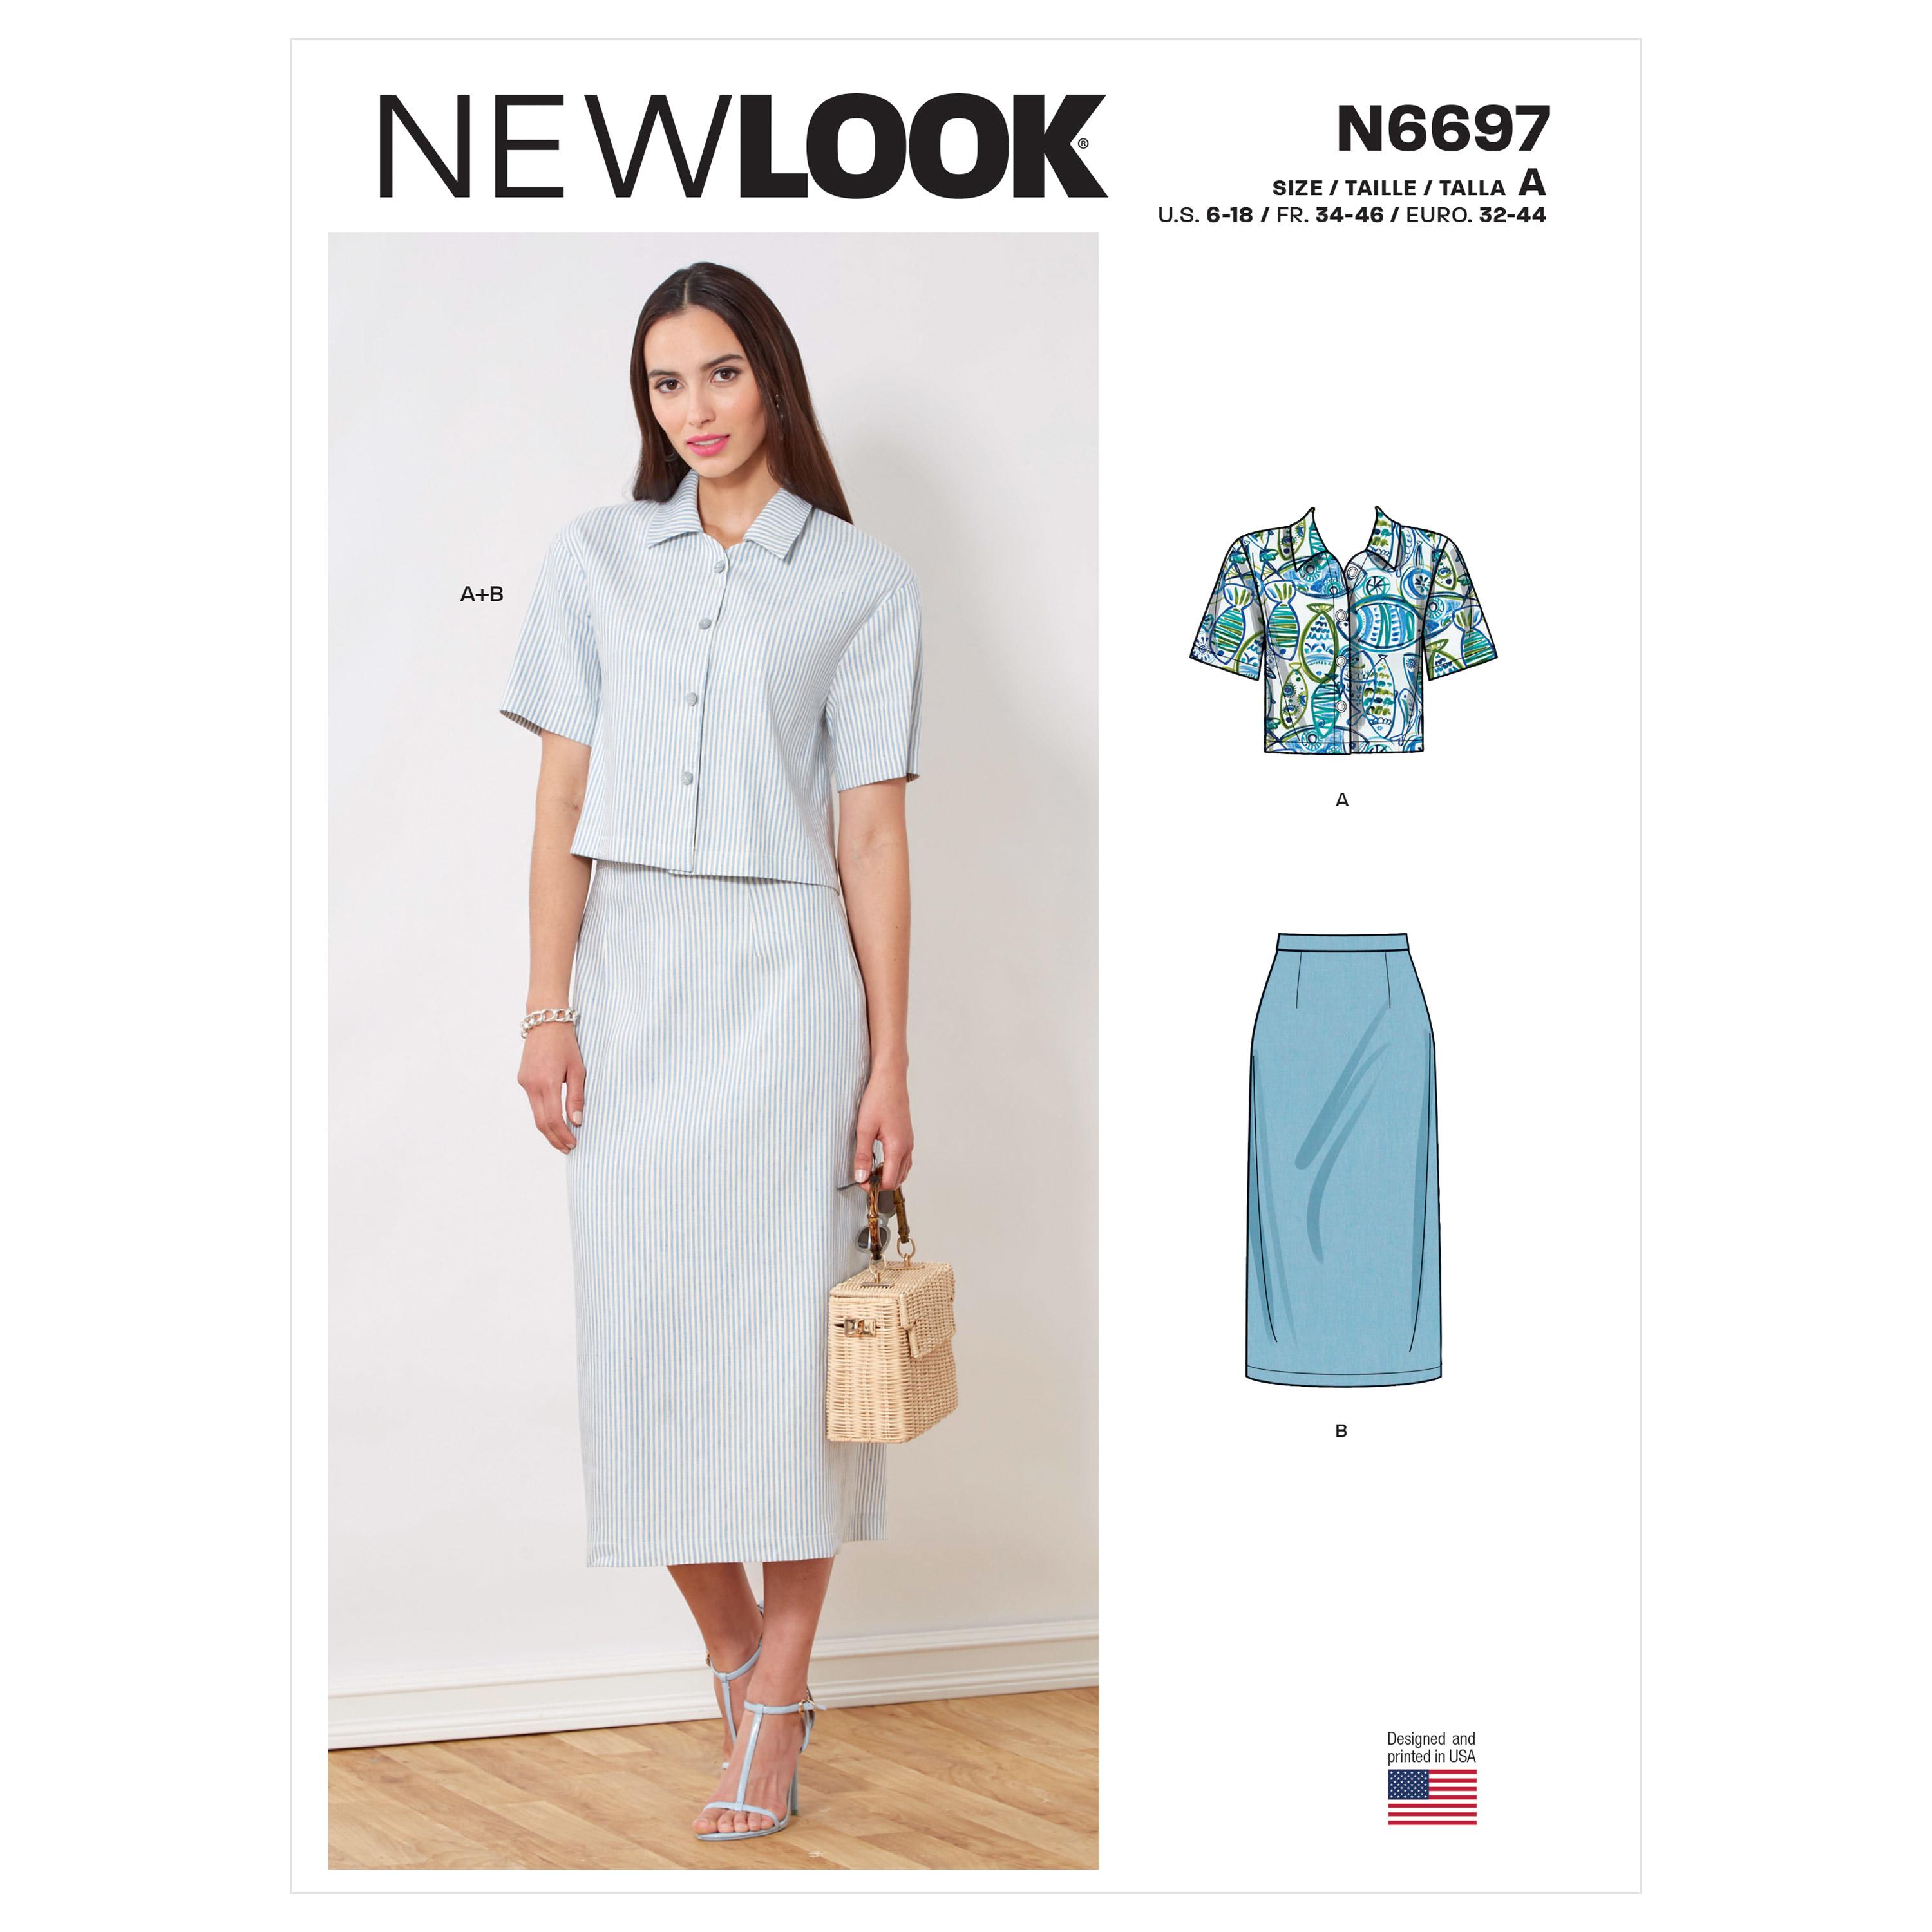 New Look Sewing Pattern N6697 Top and Skirt